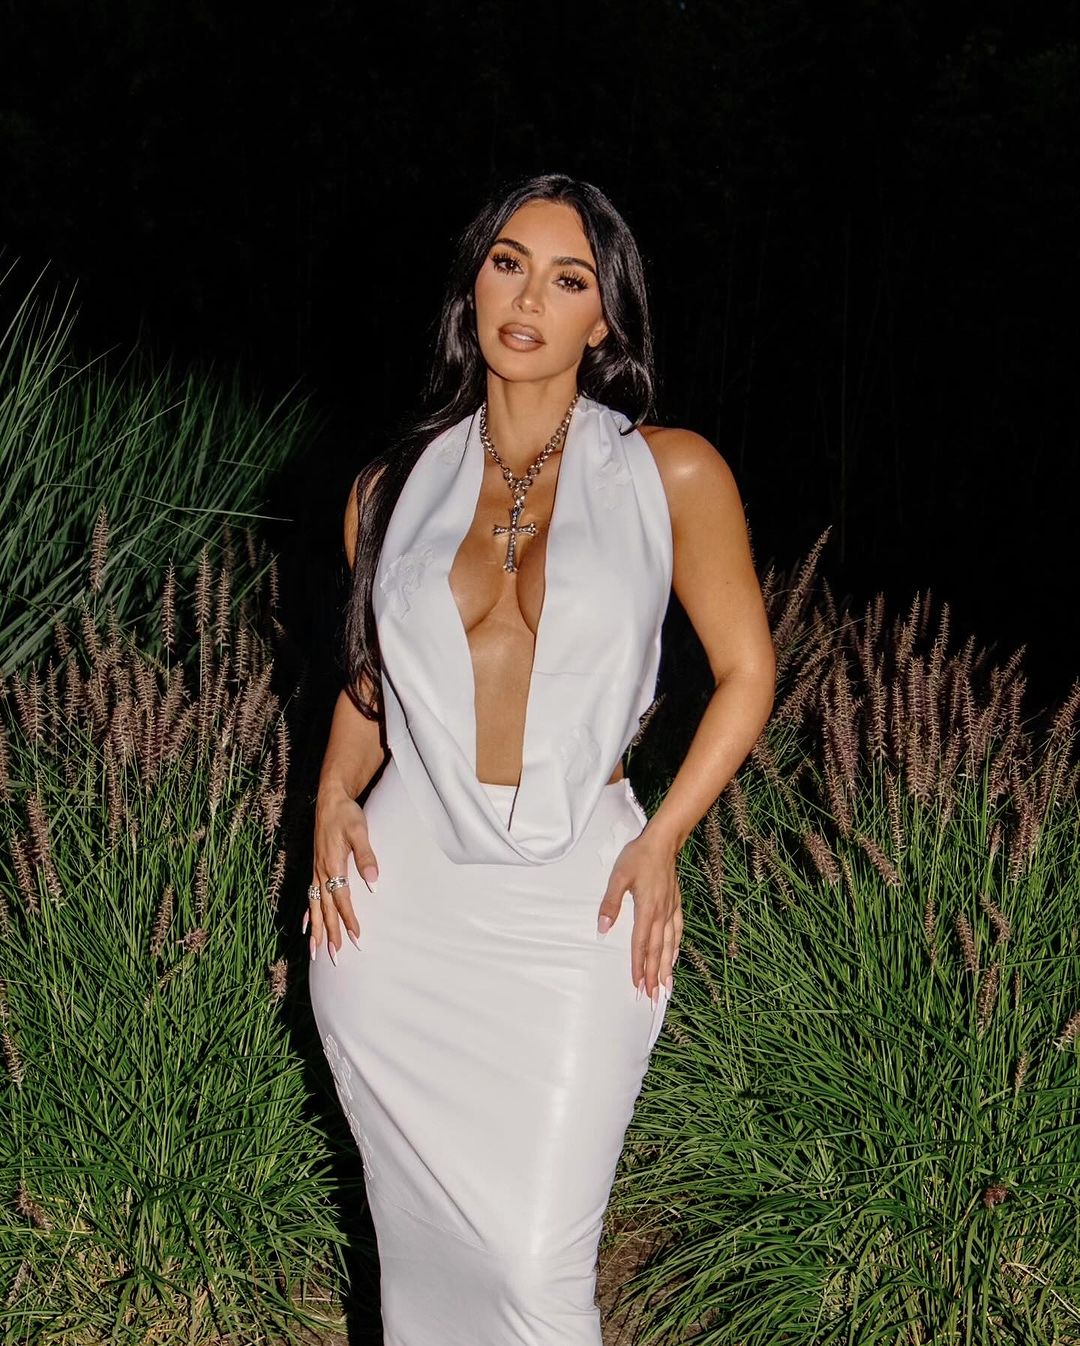 Kim Kardashian is a fan of wearing white to special occasions